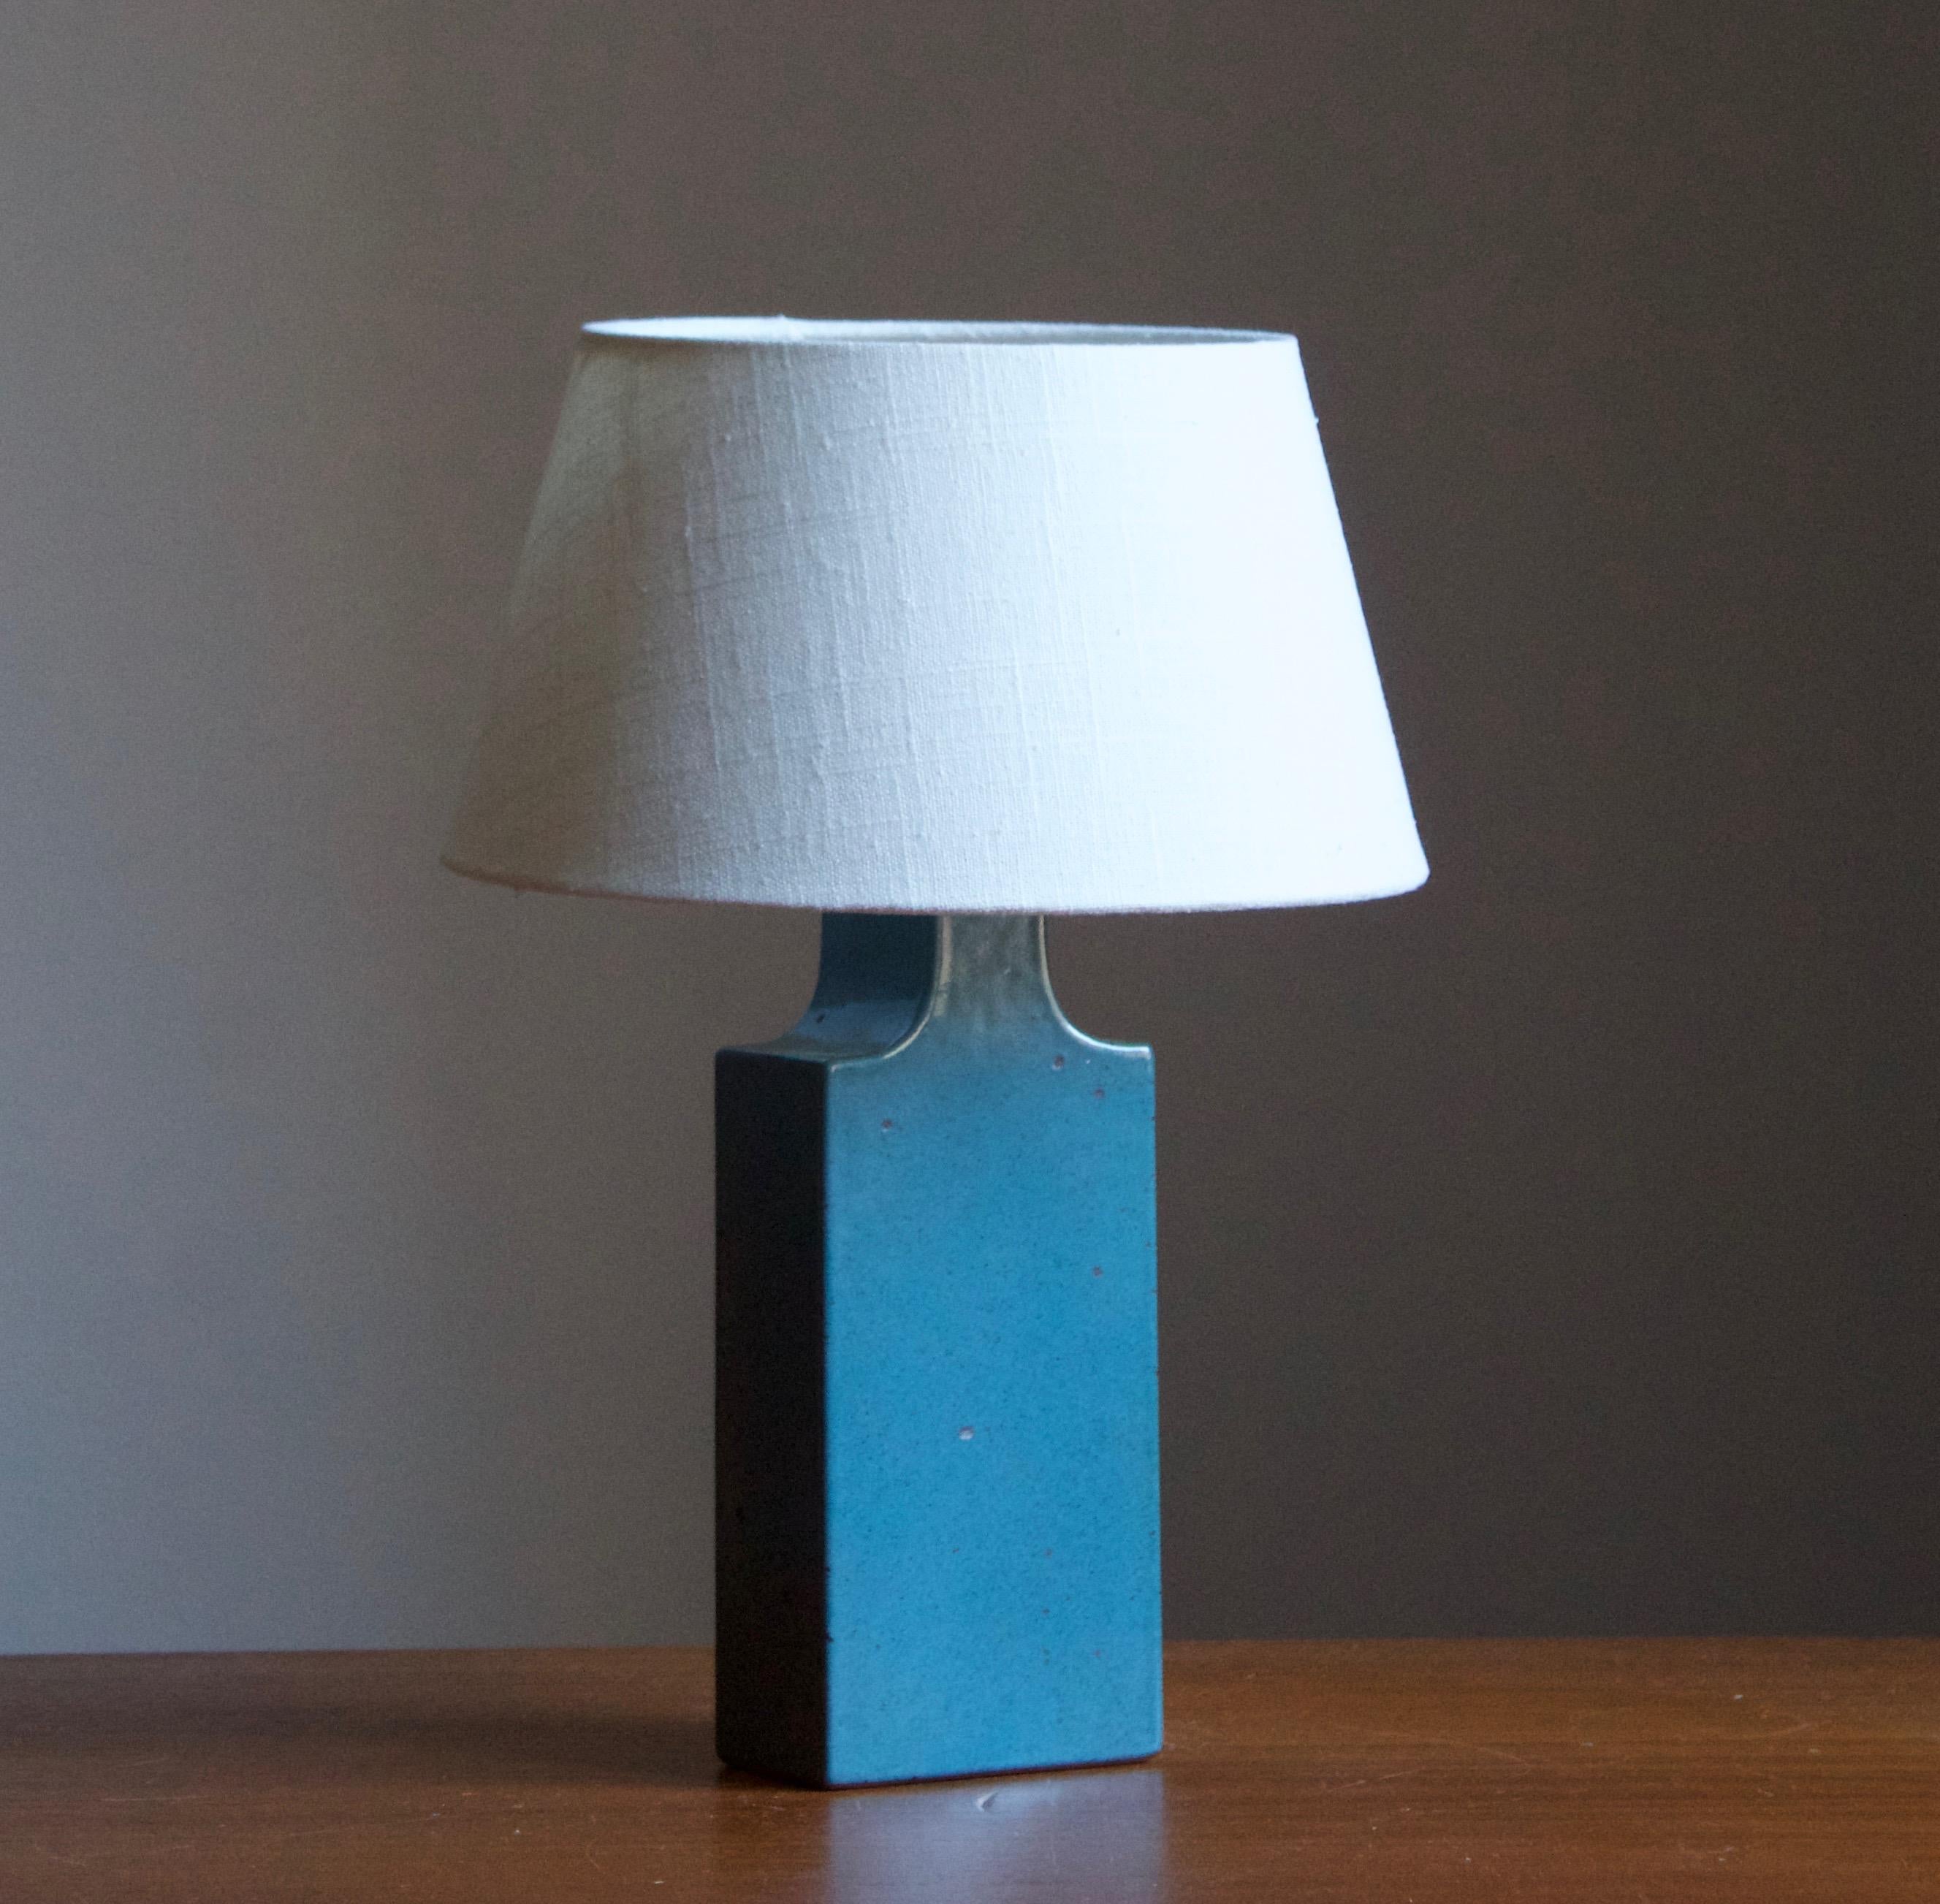 A table / desk lamp designed by husband and wife Per & Annelise Linneman-Schmidt. Handcast in stoneware, blue glaze. Produced in their own Studio, named Palshus, in Sengeløse, Denmark. Signed.

Sold without lampshade. Stated dimensions exclude